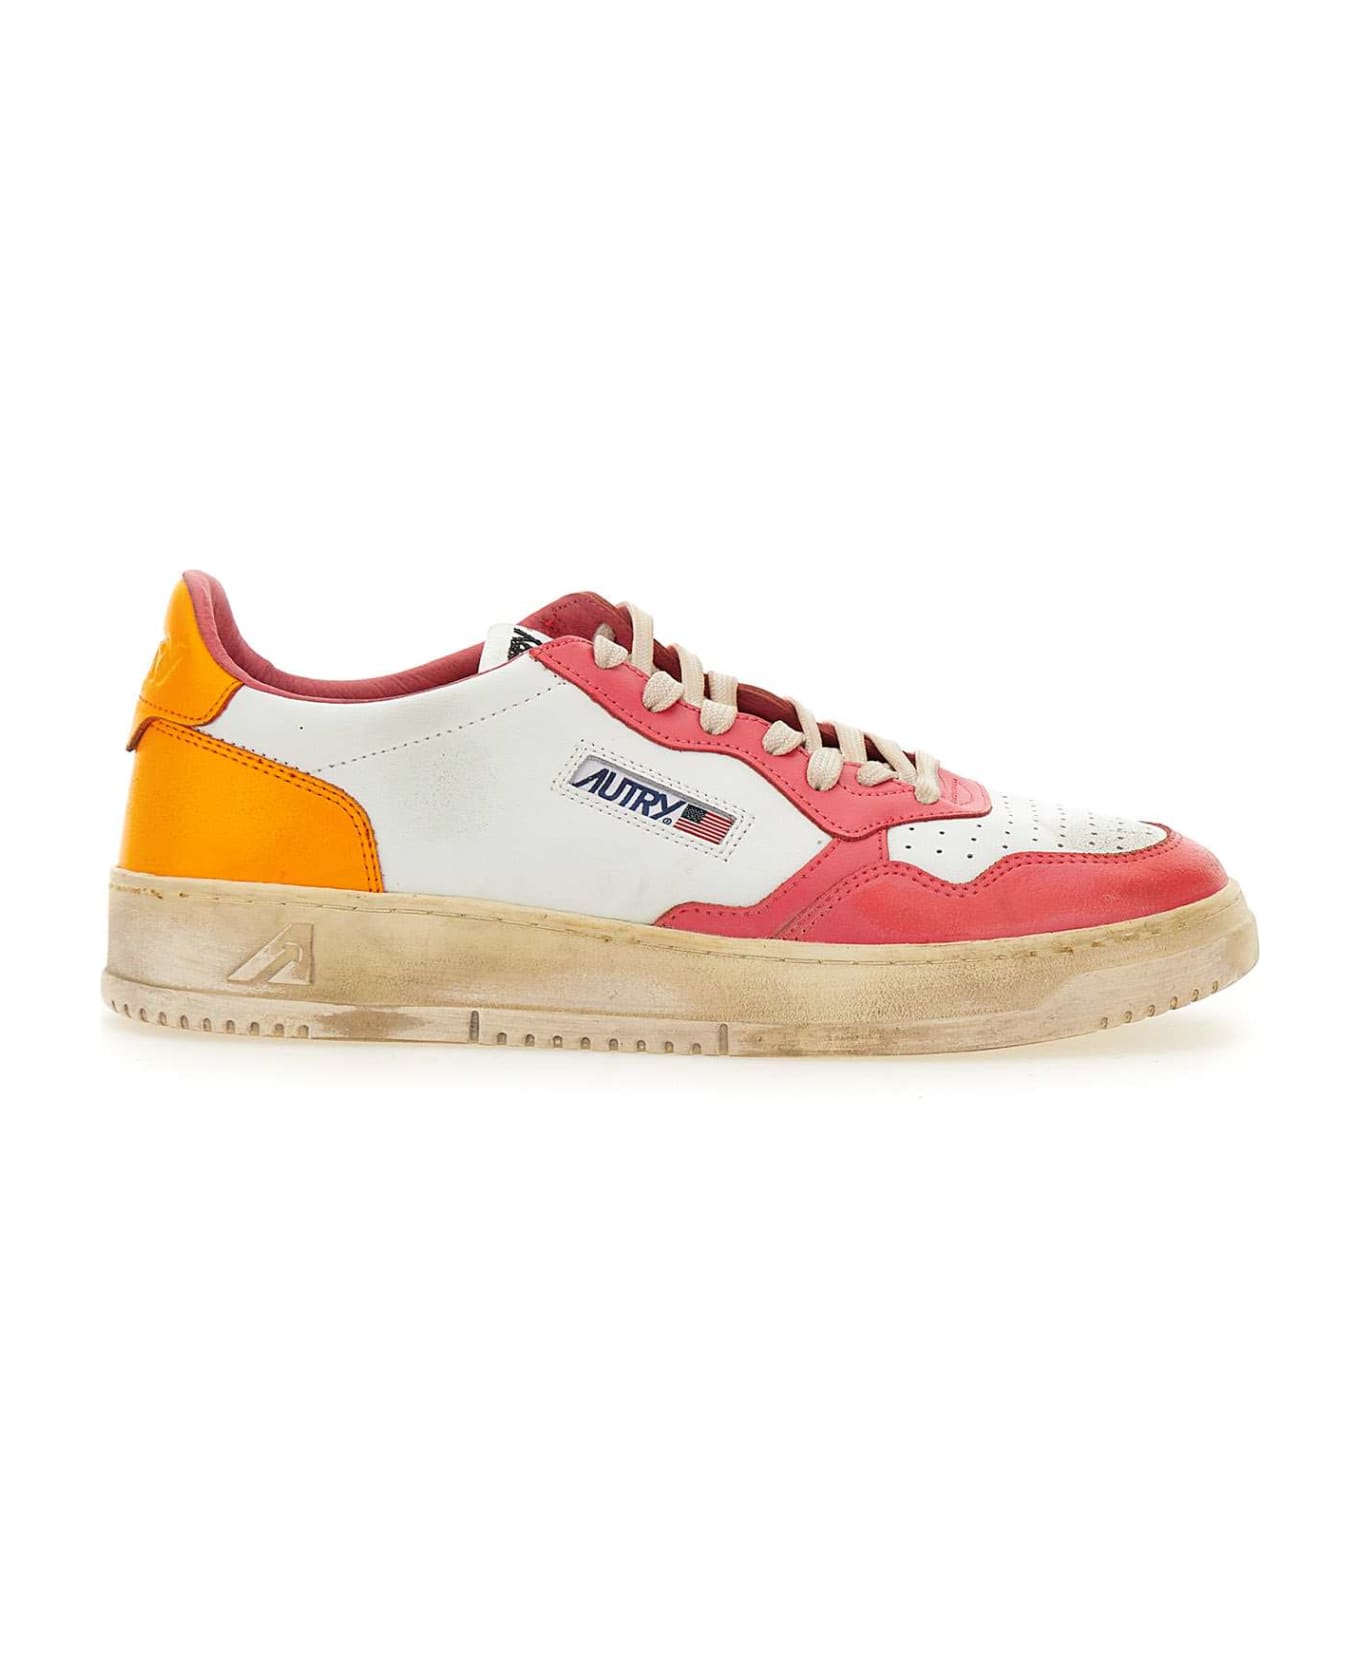 Autry "avlm Sv31" Sneakers Leather - MULTICOLOR